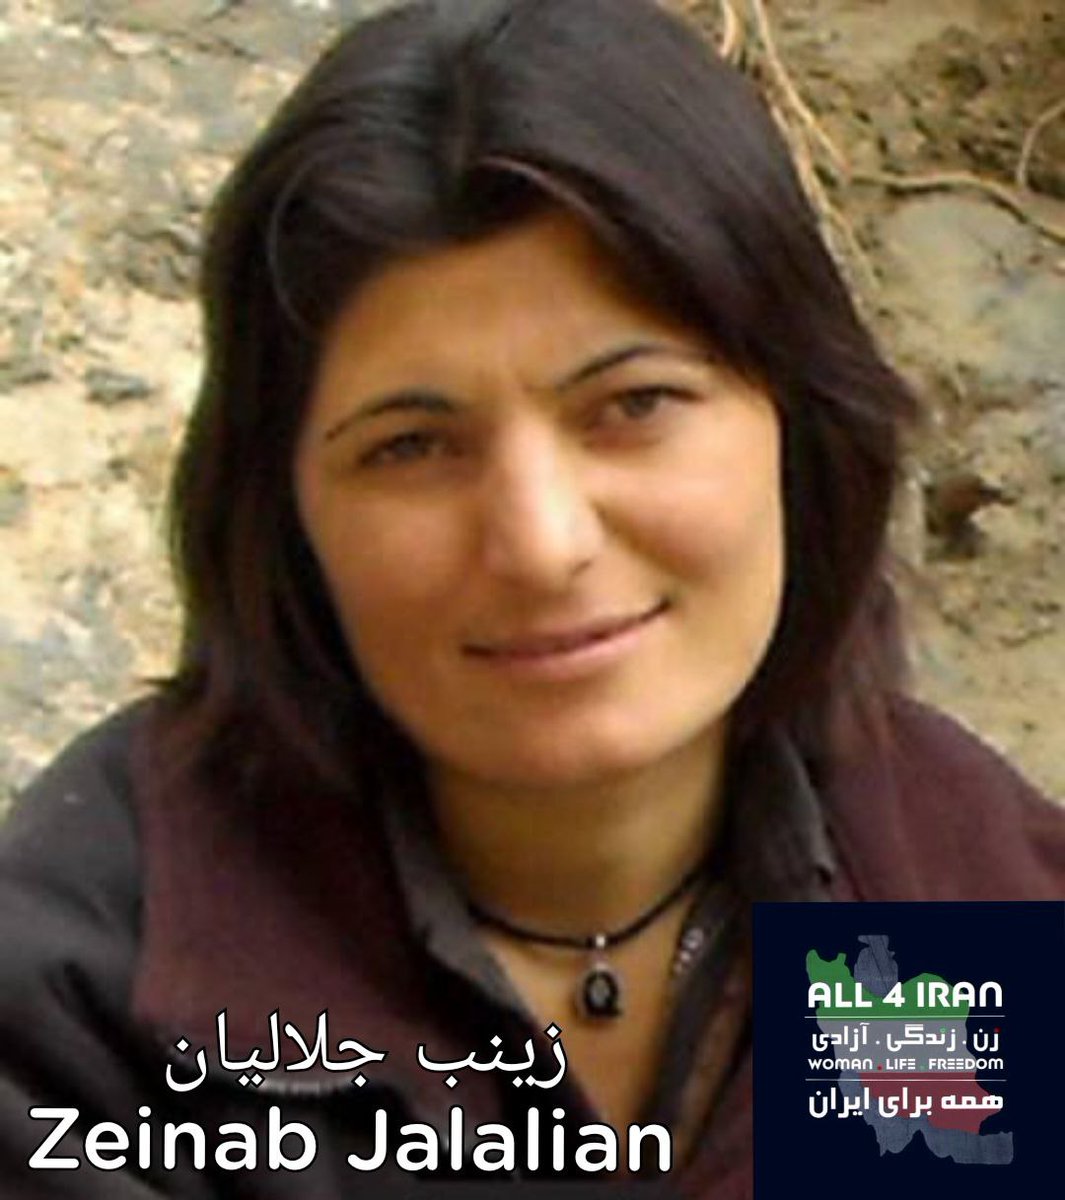 #zeynabjalalian is a symbol of #courage and #resilience in the face of #injustice. As she continues to suffer in #IRI prisons, let's raise our voices and stand in #Solidarity with her. #FreeZeynab  #HumanRights #WomanLifeFreedom
#MahsaAmin #All4Irab